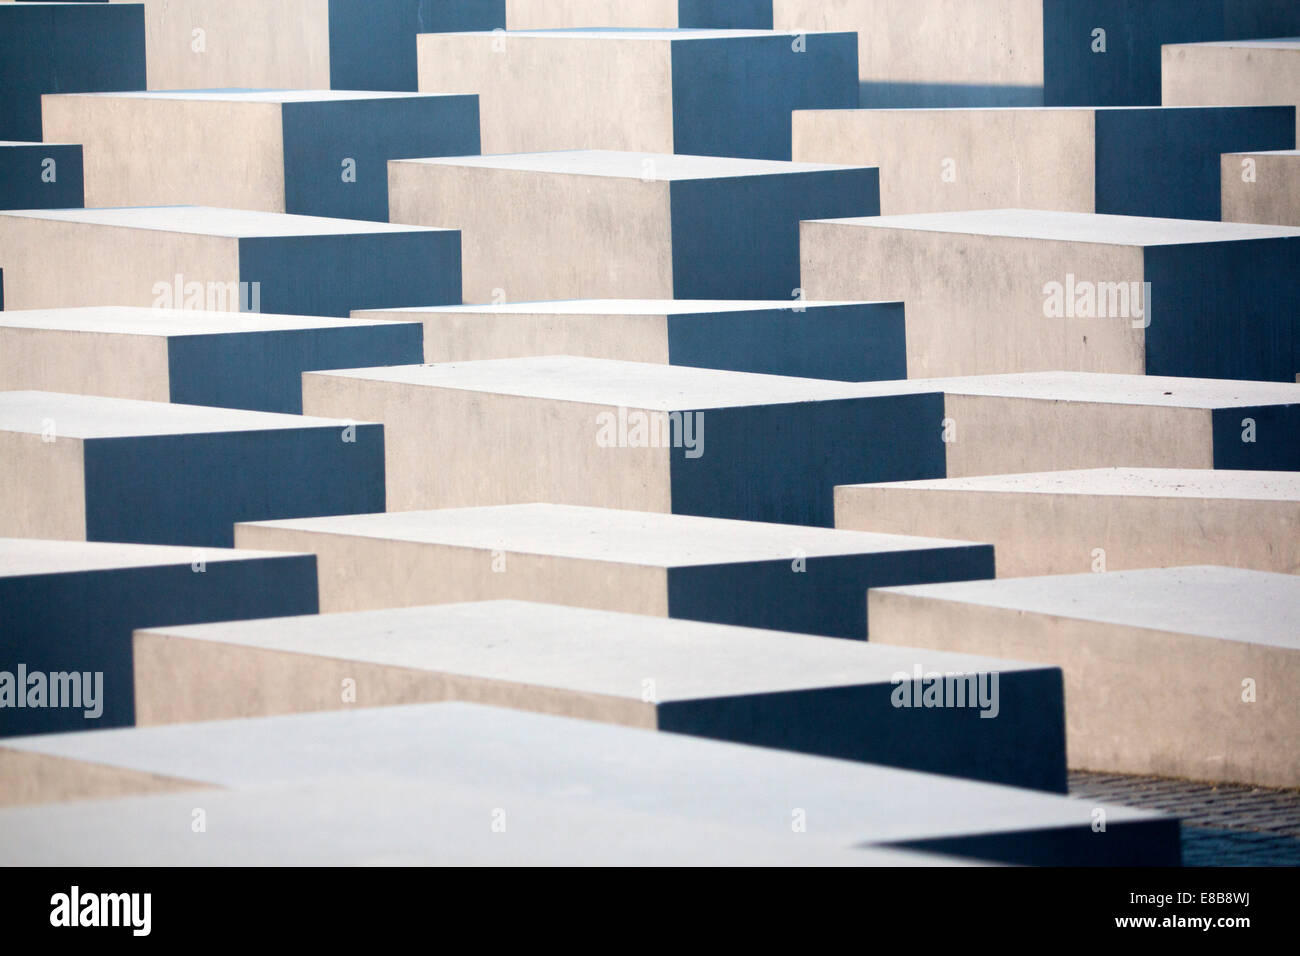 Memorial to the Murdered Jews of Europe Holocaust Memorial Abstract close view of Stelae Berlin Germany Stock Photo